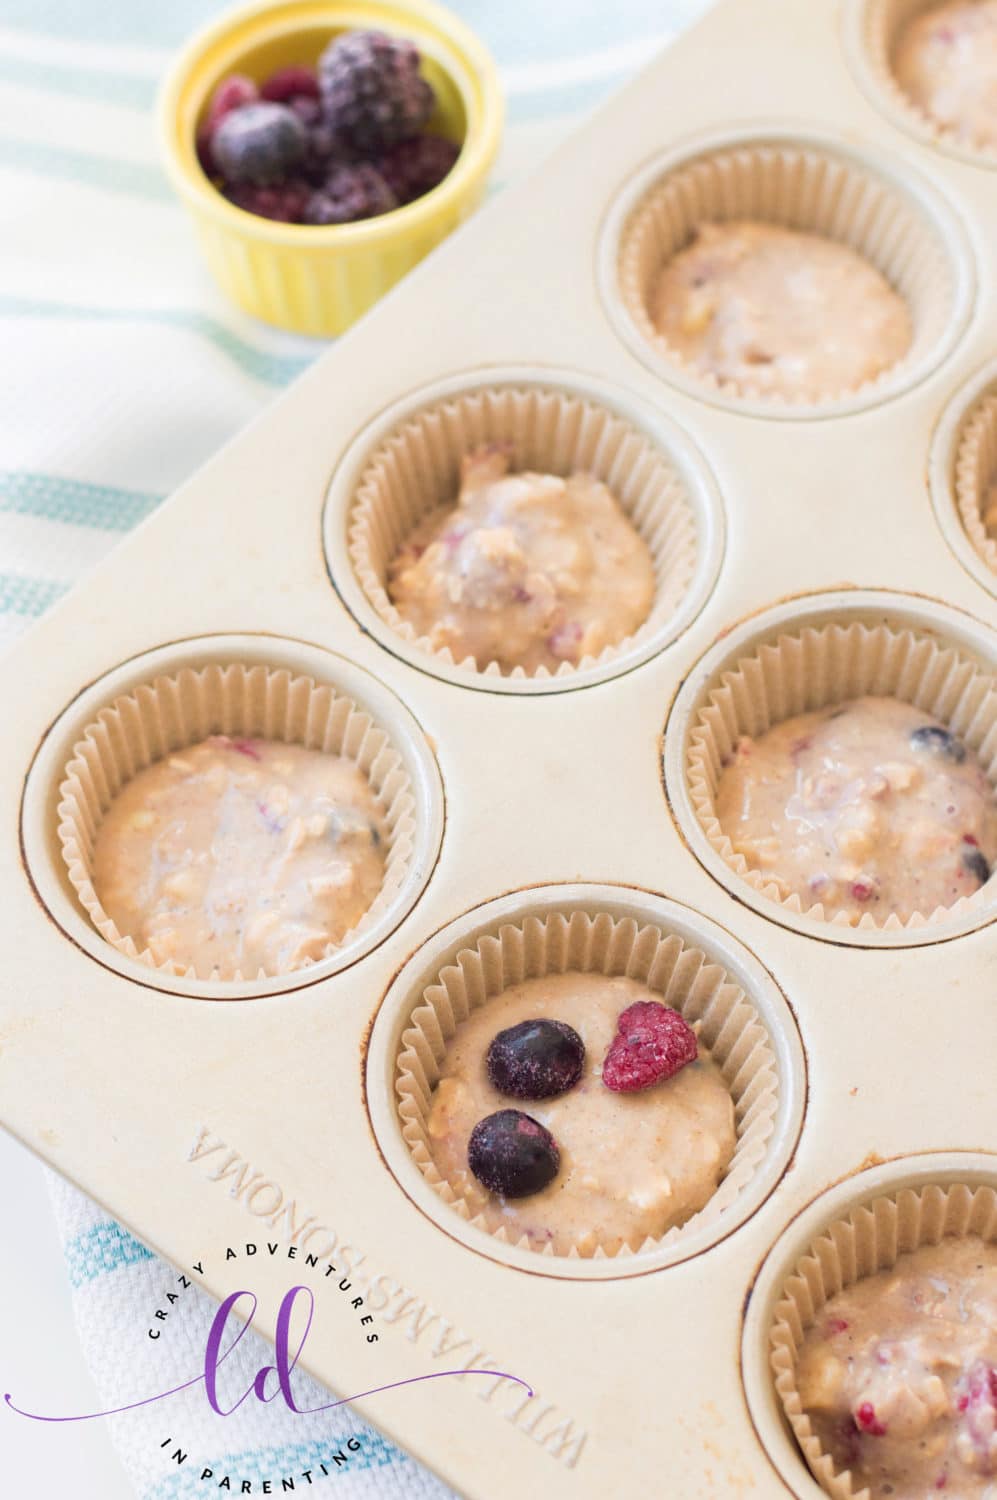 Top Muffin Batter with More Berries Before Baking Healthy Berry Muffins